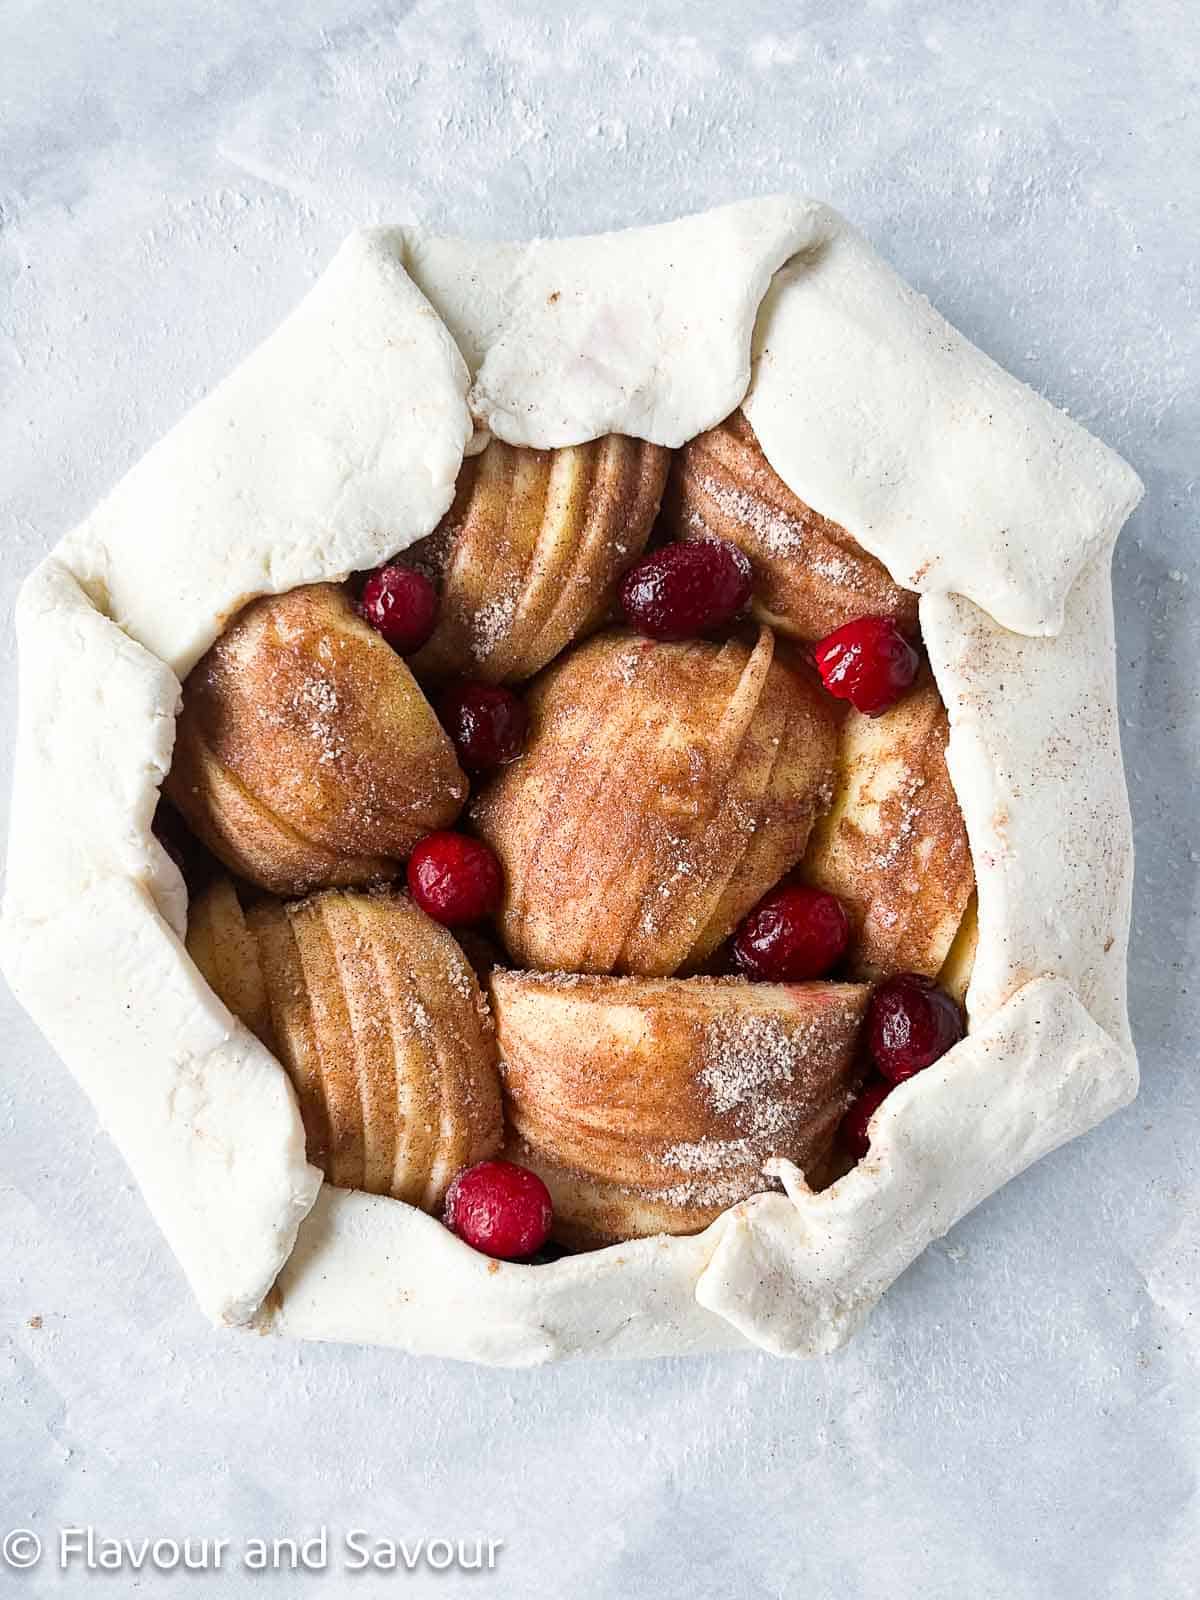 Puff pastry folded over sliced apples to make a galette.